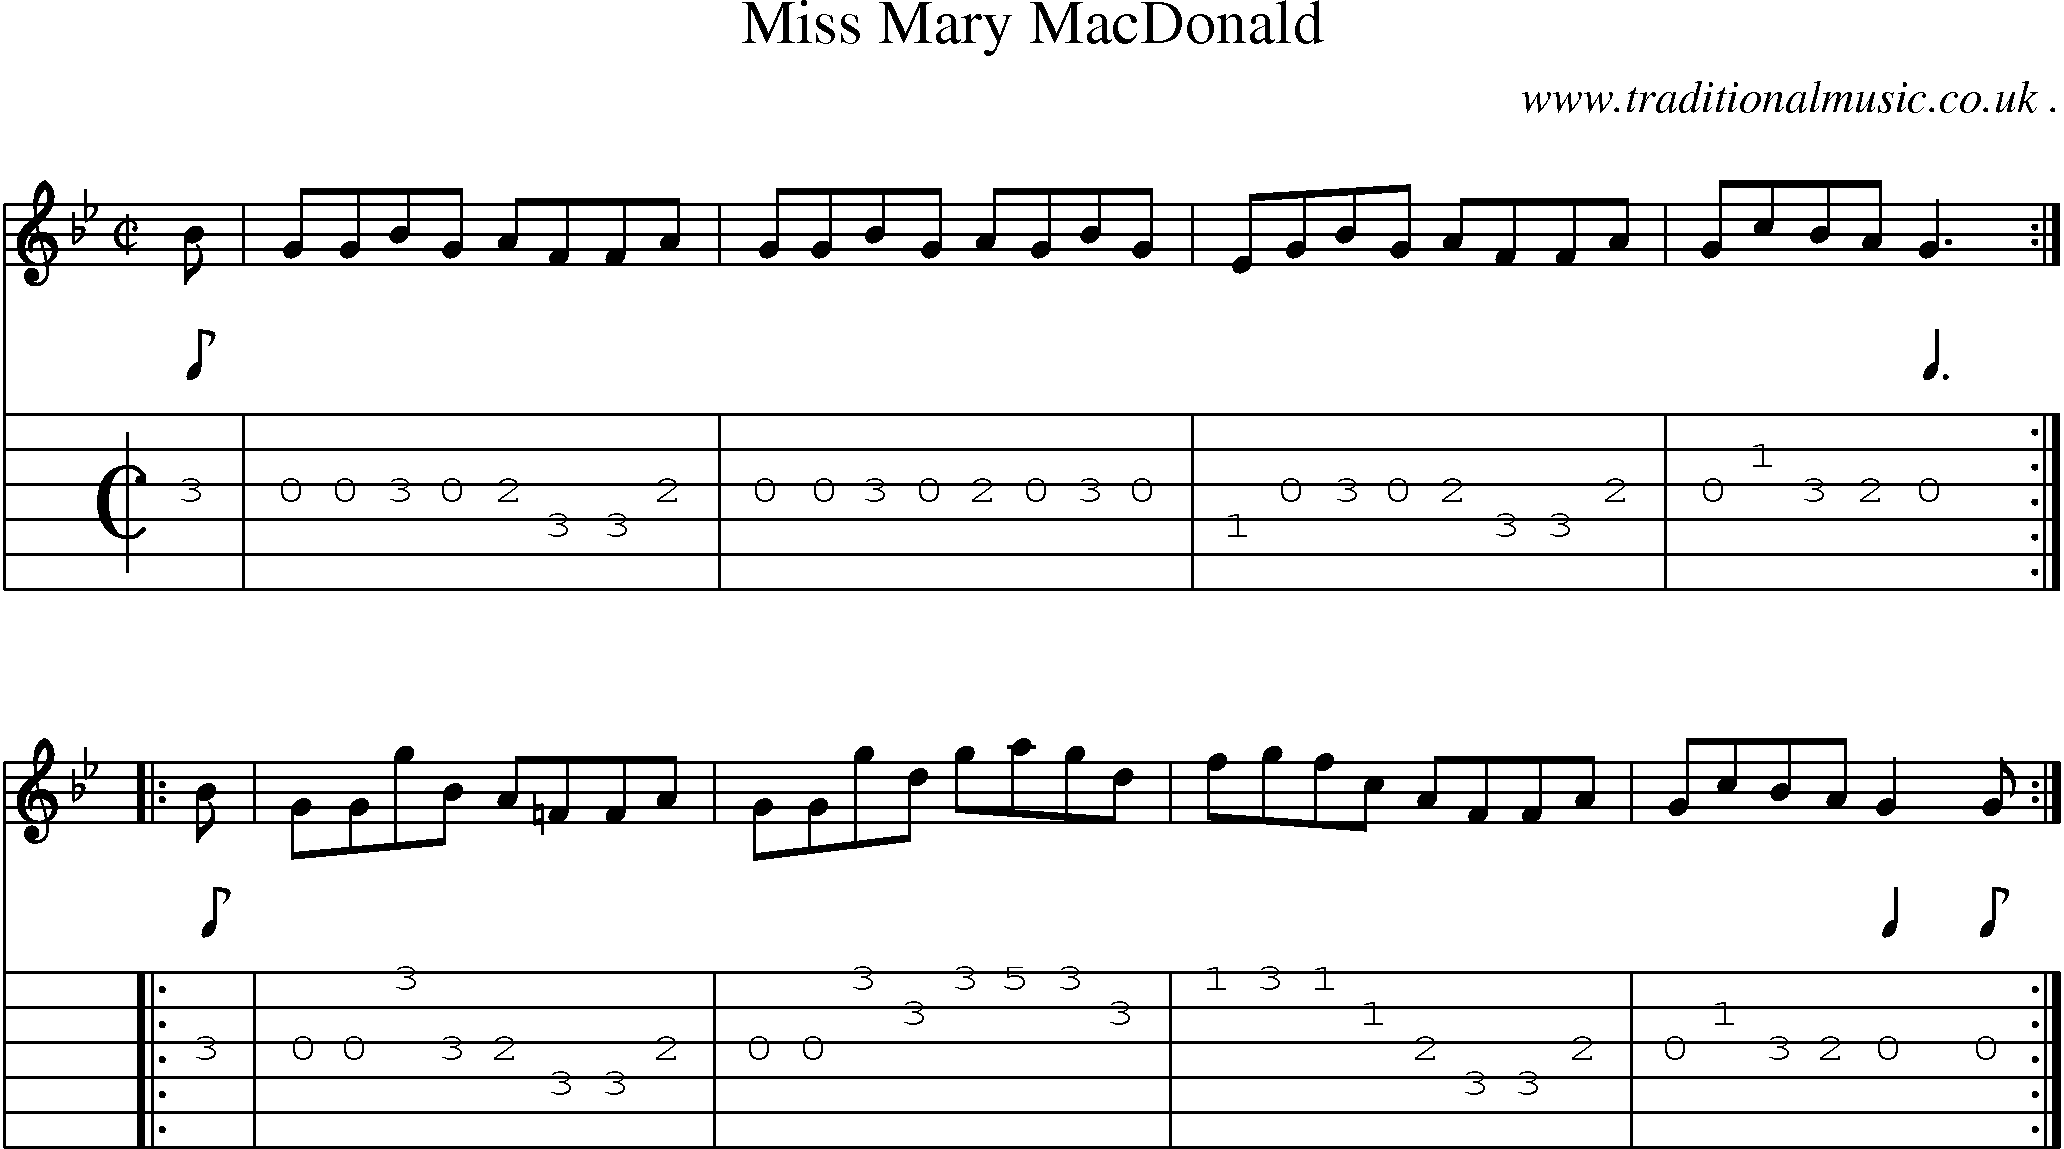 Sheet-music  score, Chords and Guitar Tabs for Miss Mary Macdonald